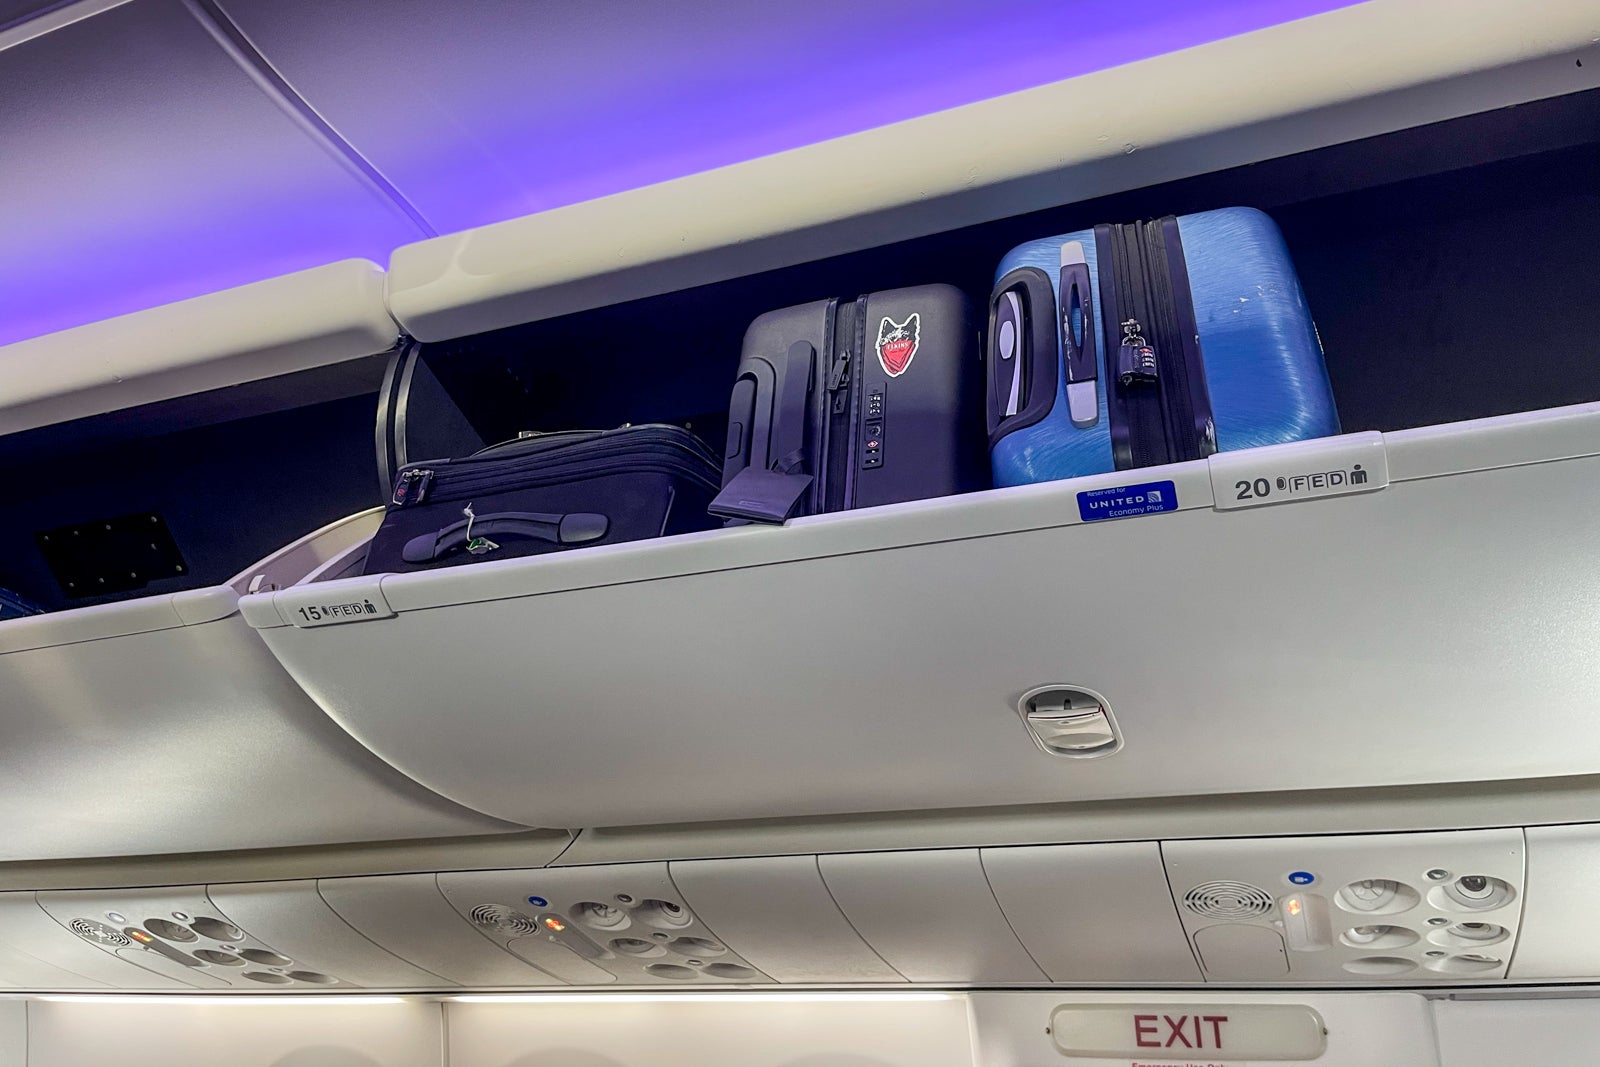 Large overhead bins on the Boeing 737 MAX